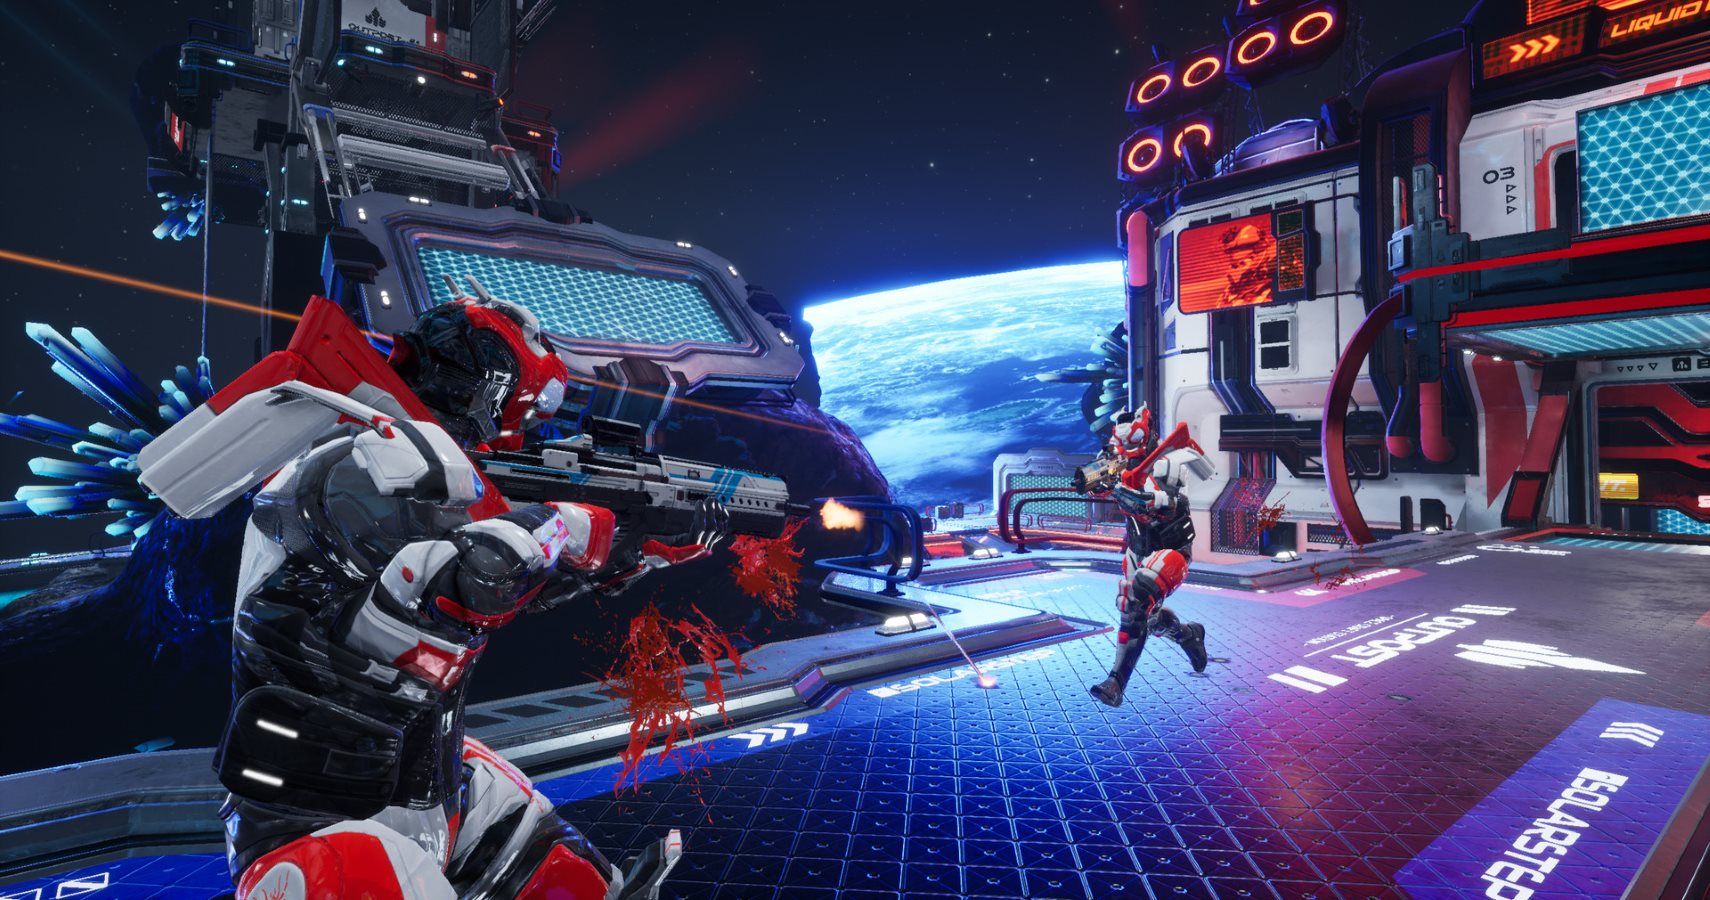 SLIVER.tv Wants To Be The Next Big Streaming Platform, Partners With Splitgate